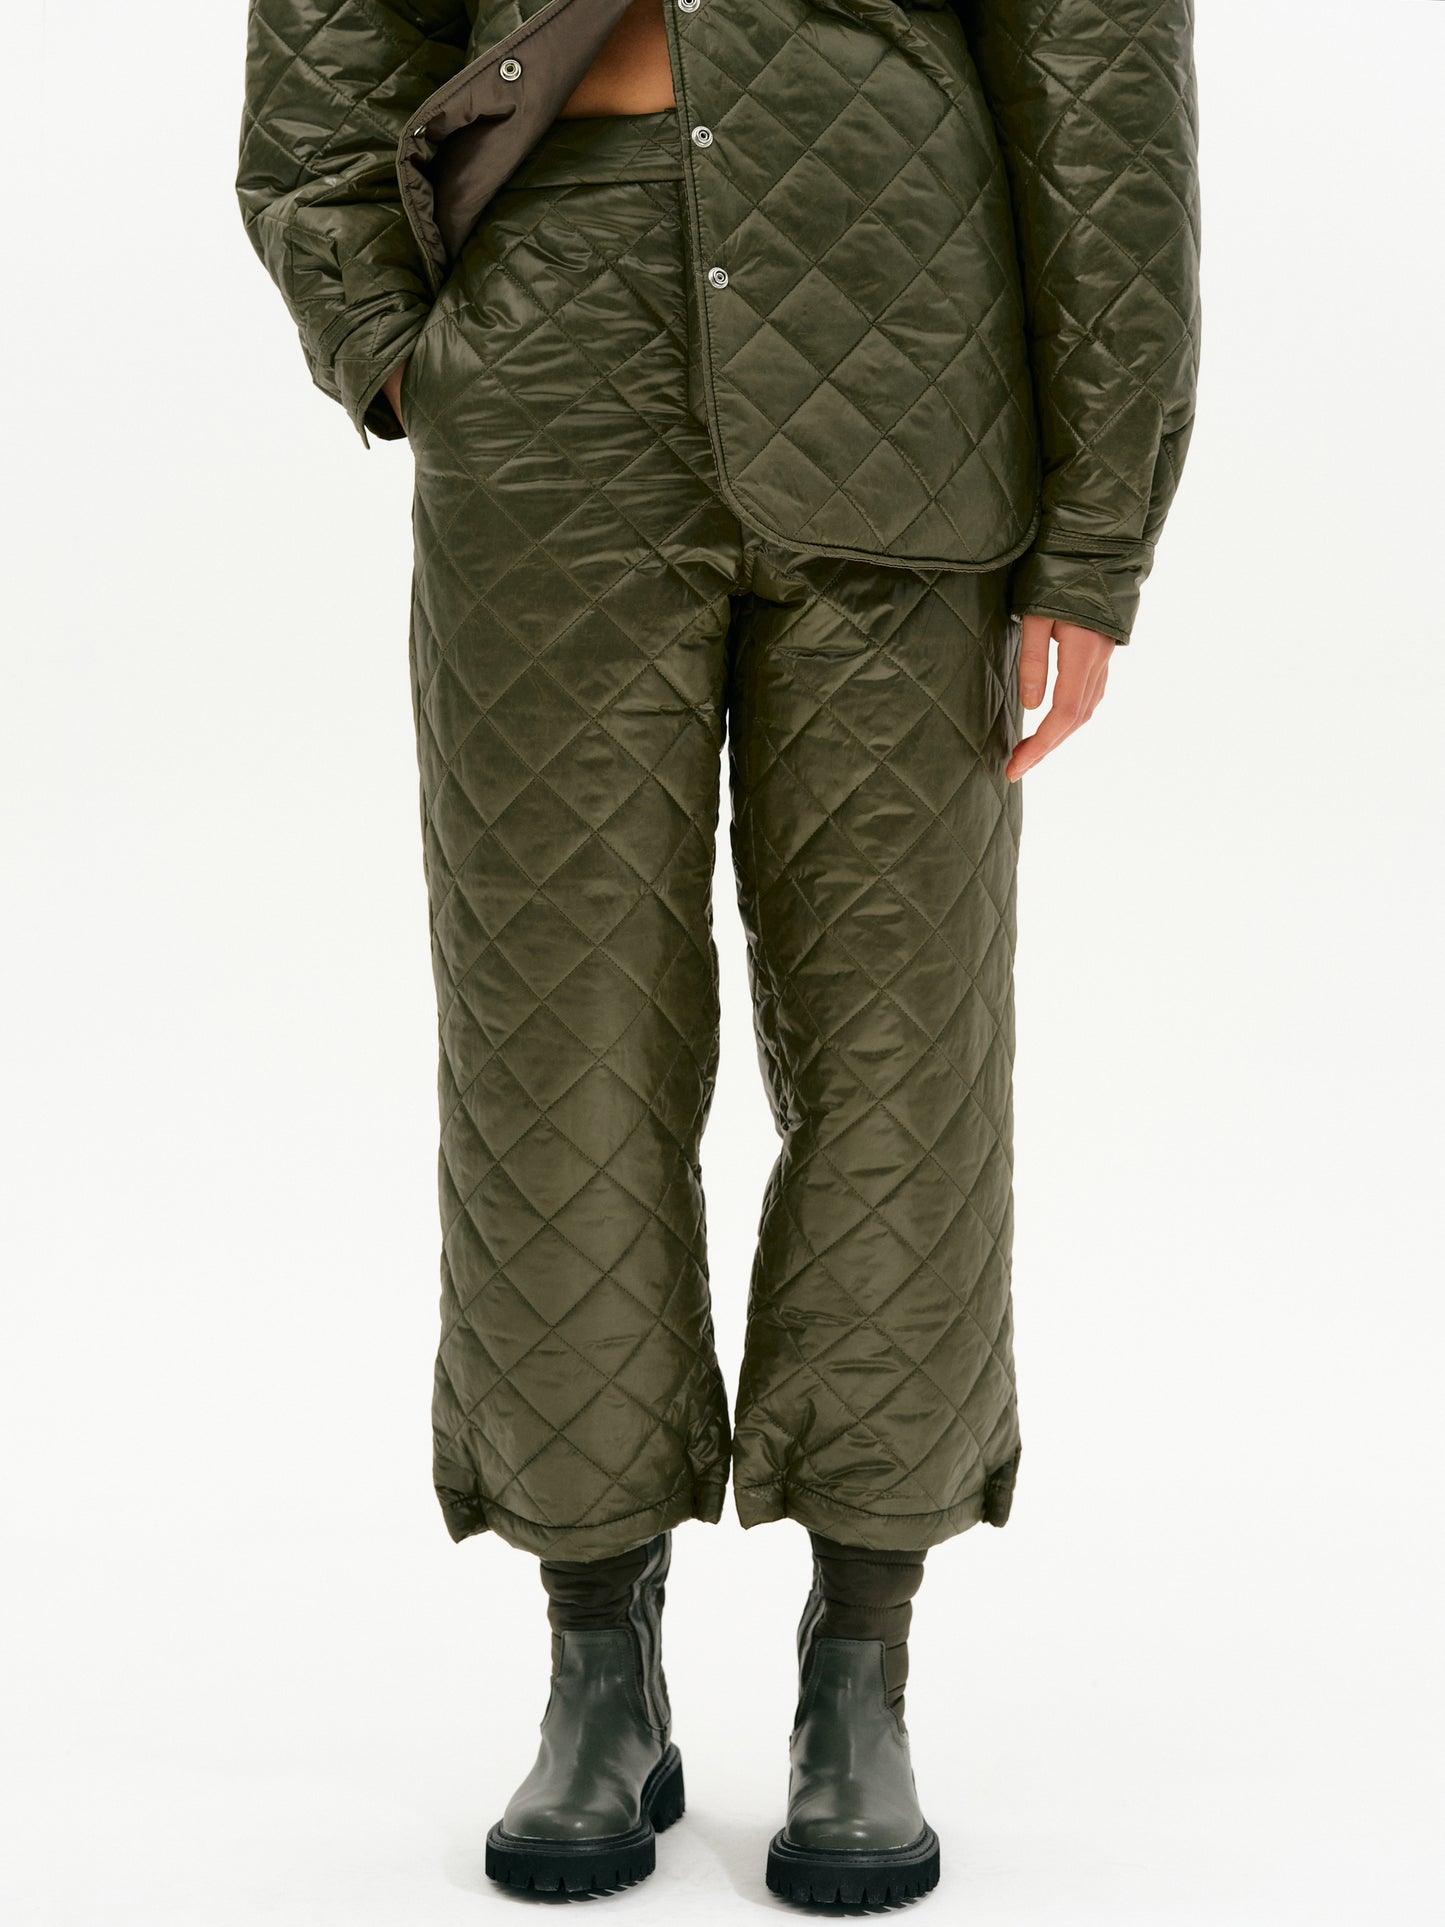 Diamond Quilted Trousers, Martini Olive